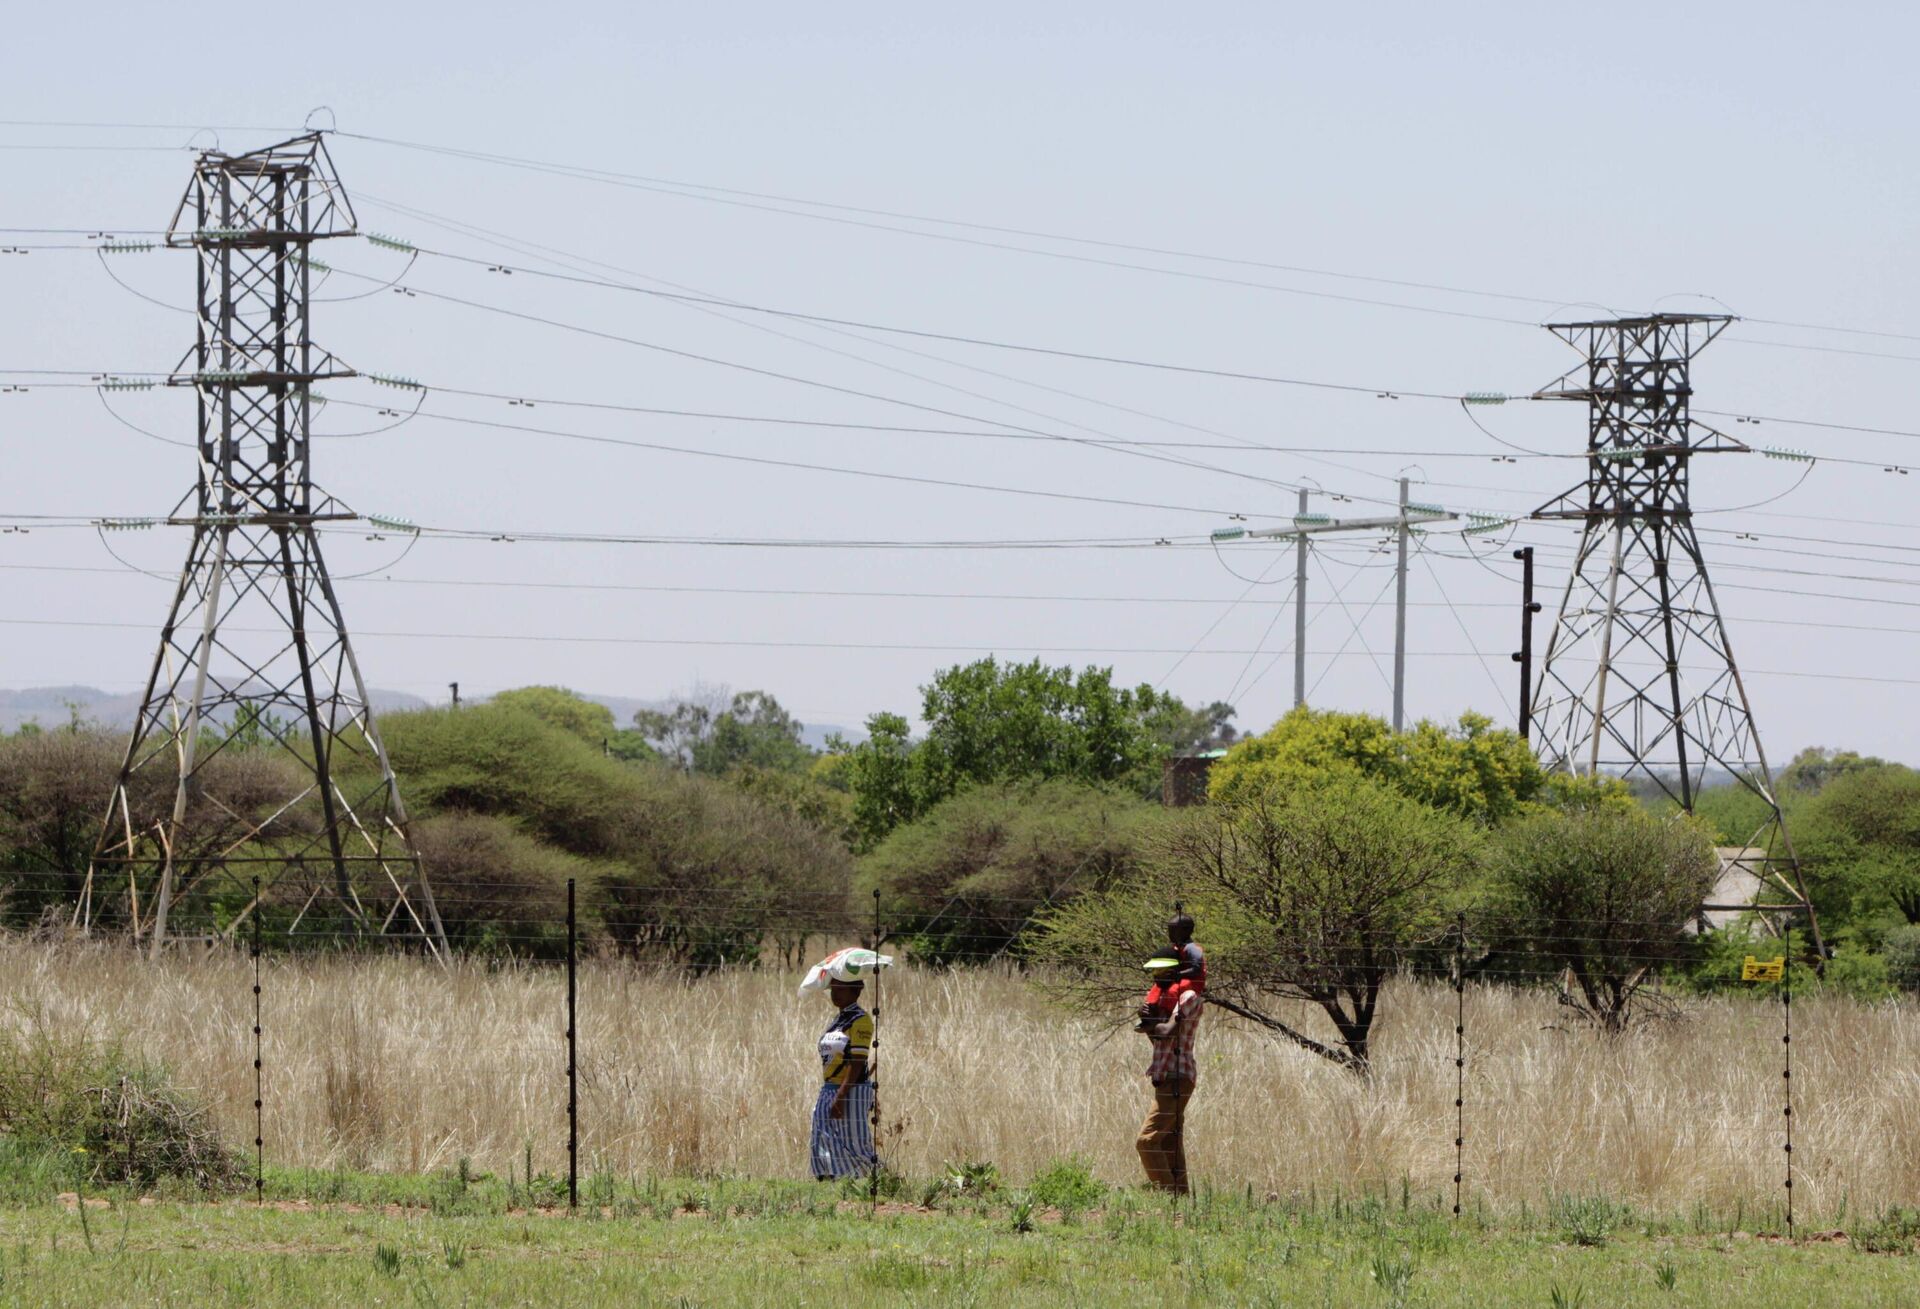 People walk below power pylons at Hartebeespoort, South Africa, Friday Nov. 25, 2011.  Eskom is Africa's biggest power utility, accounting for more than 60 percent of all the electricity generated on the continent, according to the World Bank. It also exports across southern Africa. Critics and even supporters say Eskom should have started its move toward renewable sources of energy earlier, and now needs to set its ambitions higher. (AP Photo/Denis Farrell) - Sputnik International, 1920, 23.12.2022